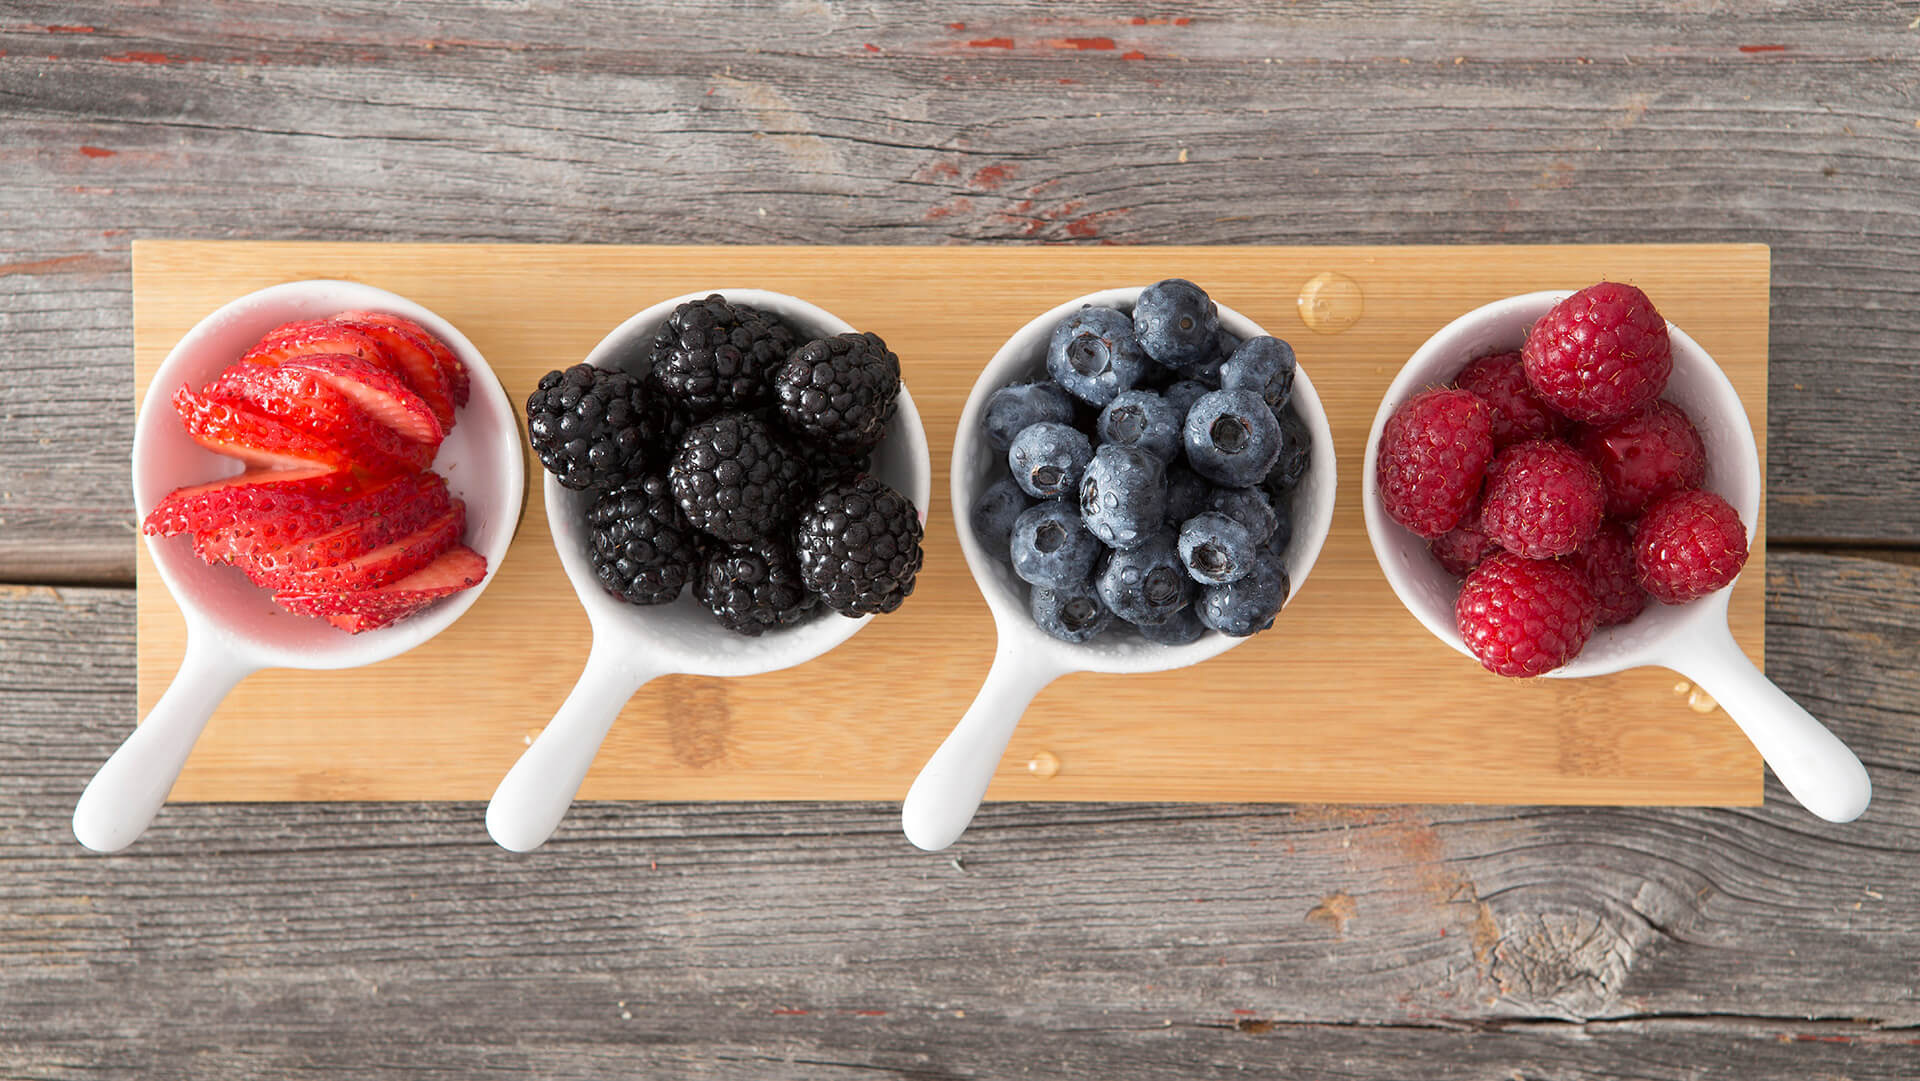 Taster dishes of assorted autumn berries viewed from above arranged on a wooden board on a rustic, kitchen table including whole fresh blueberries, blackberries, raspberries and sliced strawberries